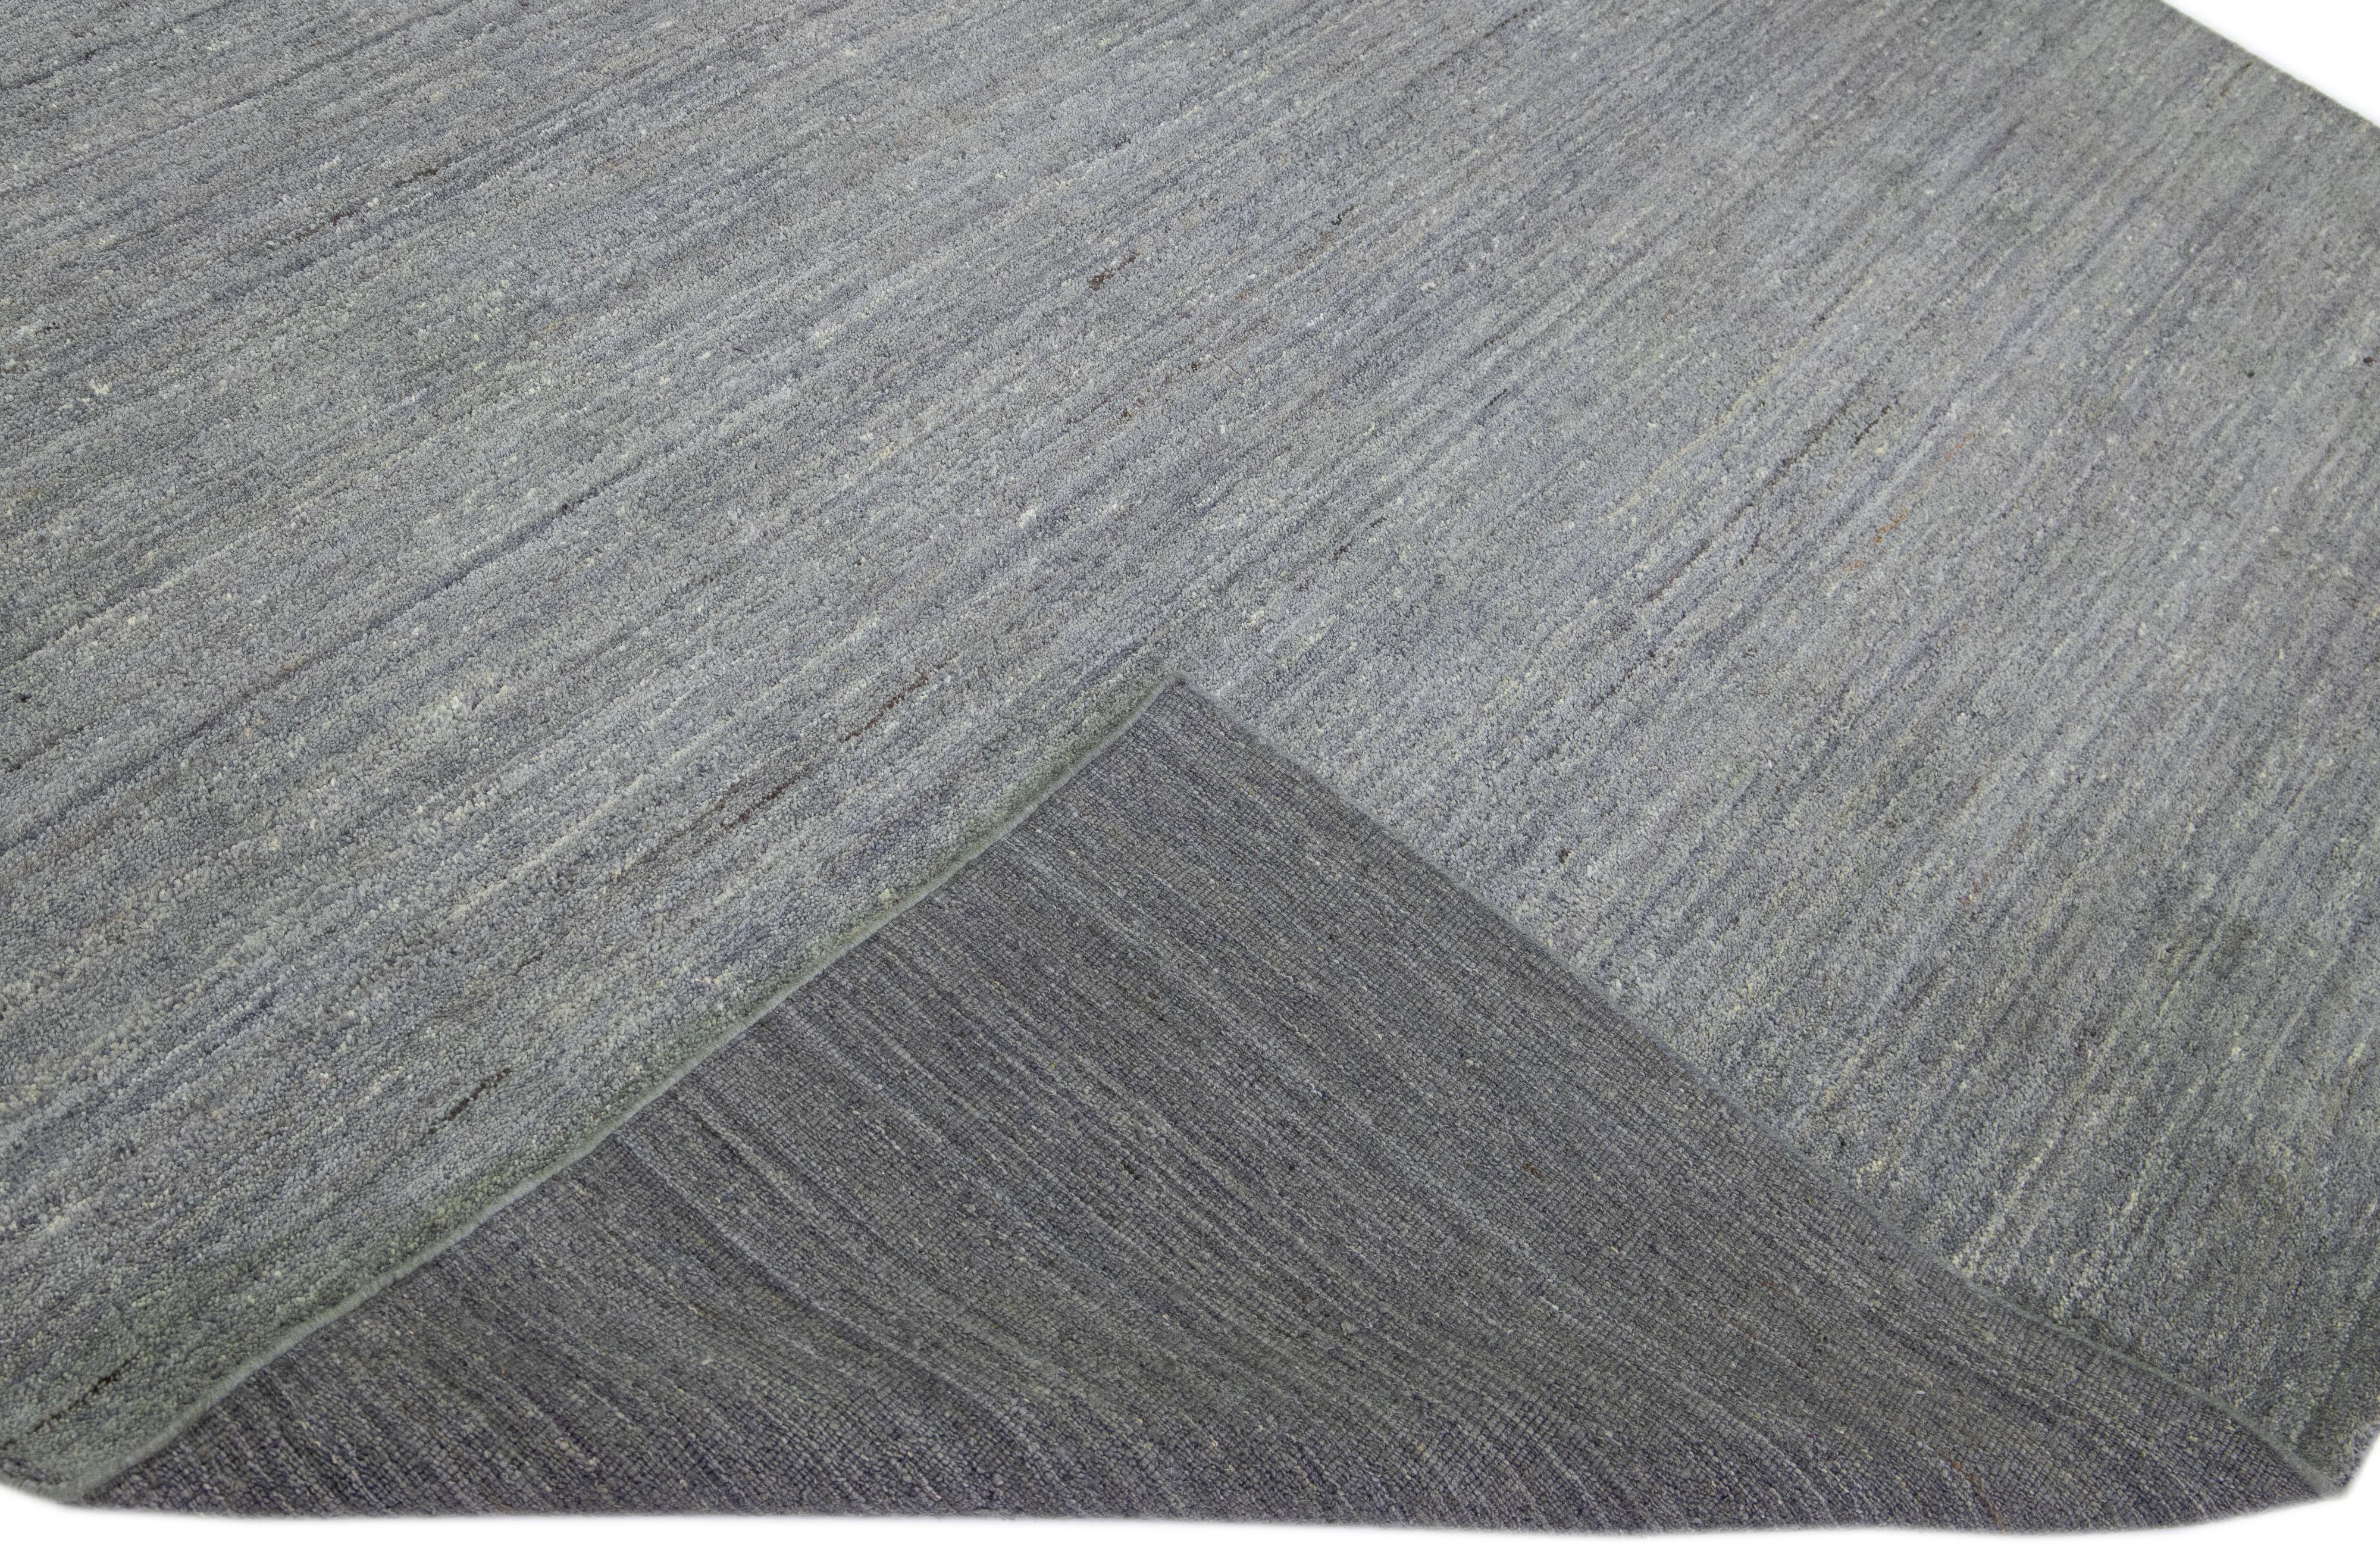 Beautiful modern Gabbeh style hand-knotted wool rug with a gray field in a gorgeous solid design.

This rug measures: 8'9